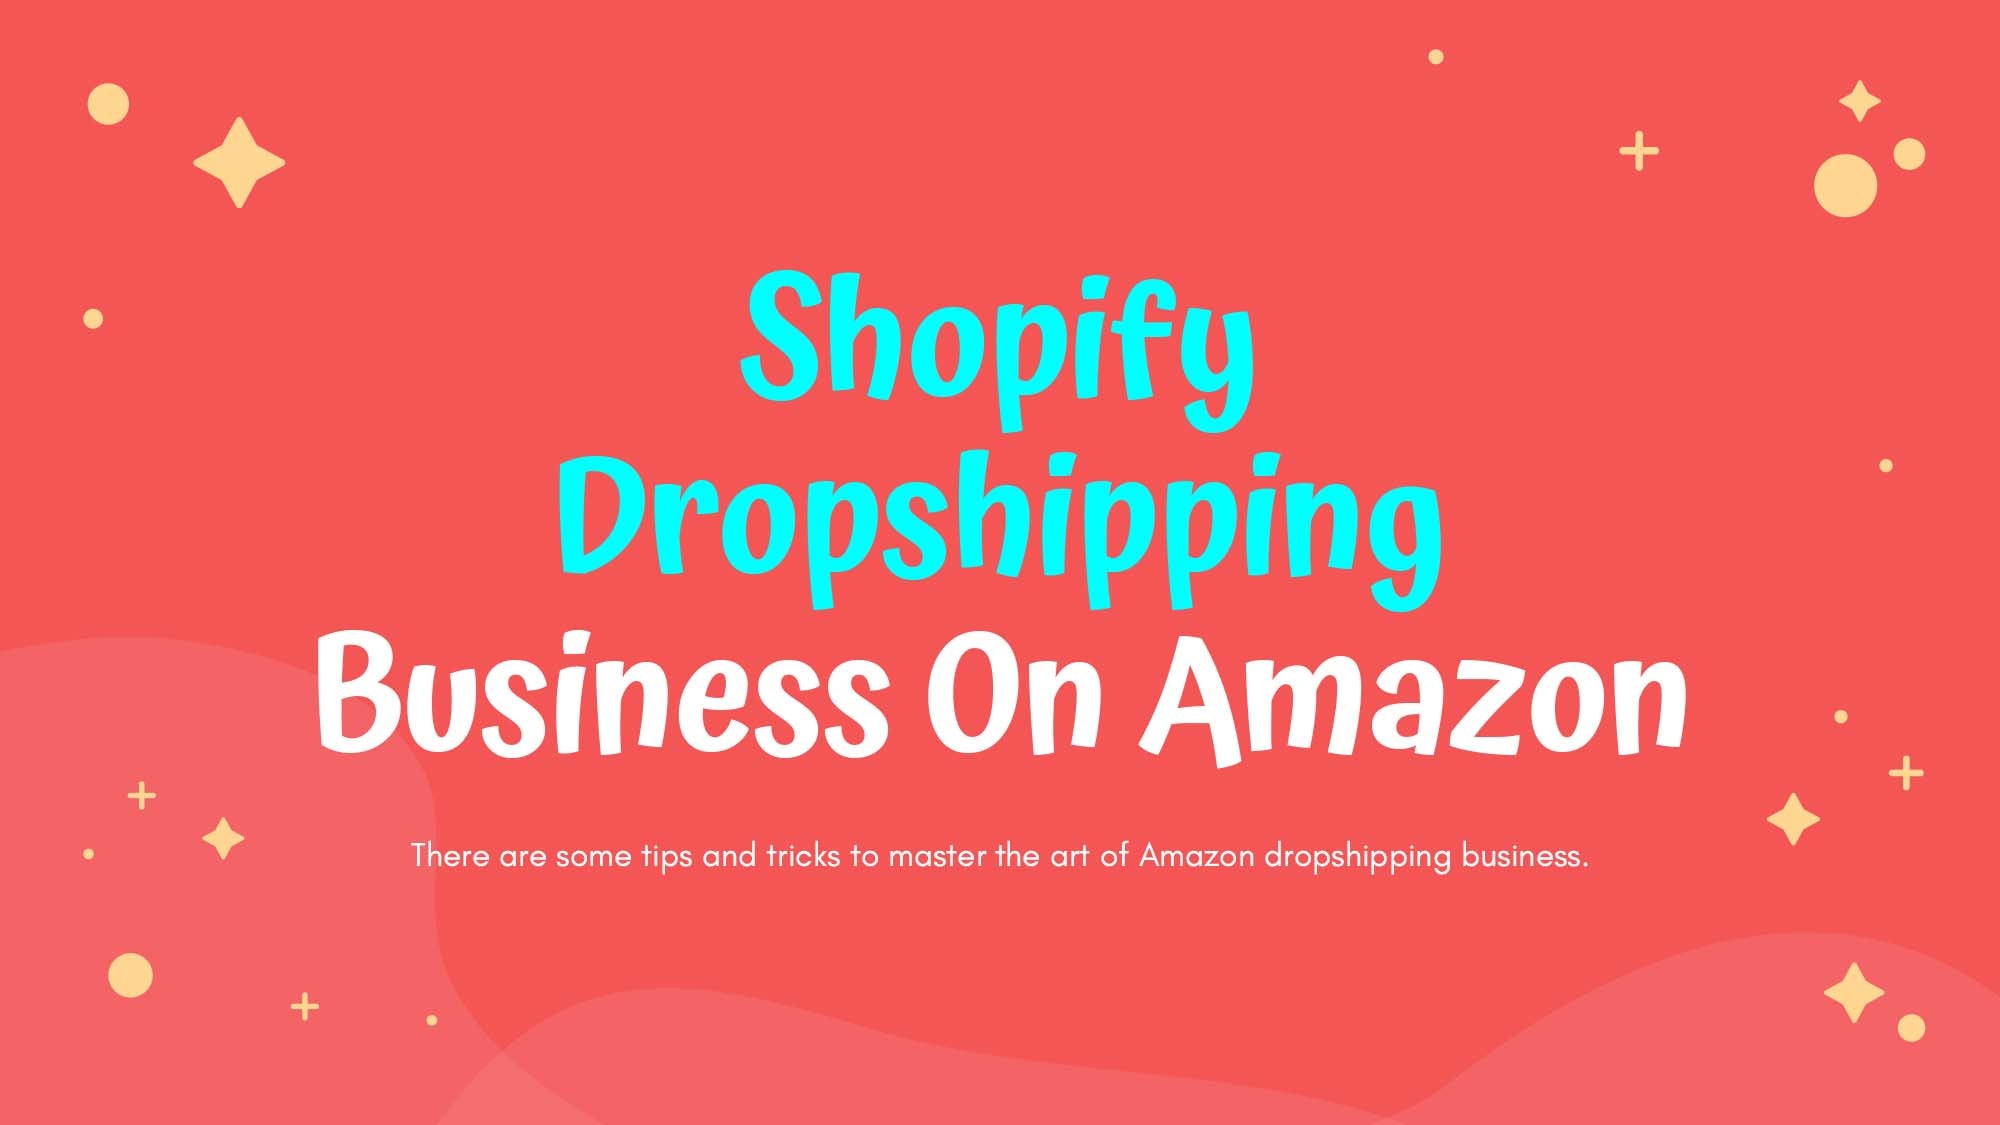 Top Tips That Will Help Your Shopify Dropshipping Business On Amazon